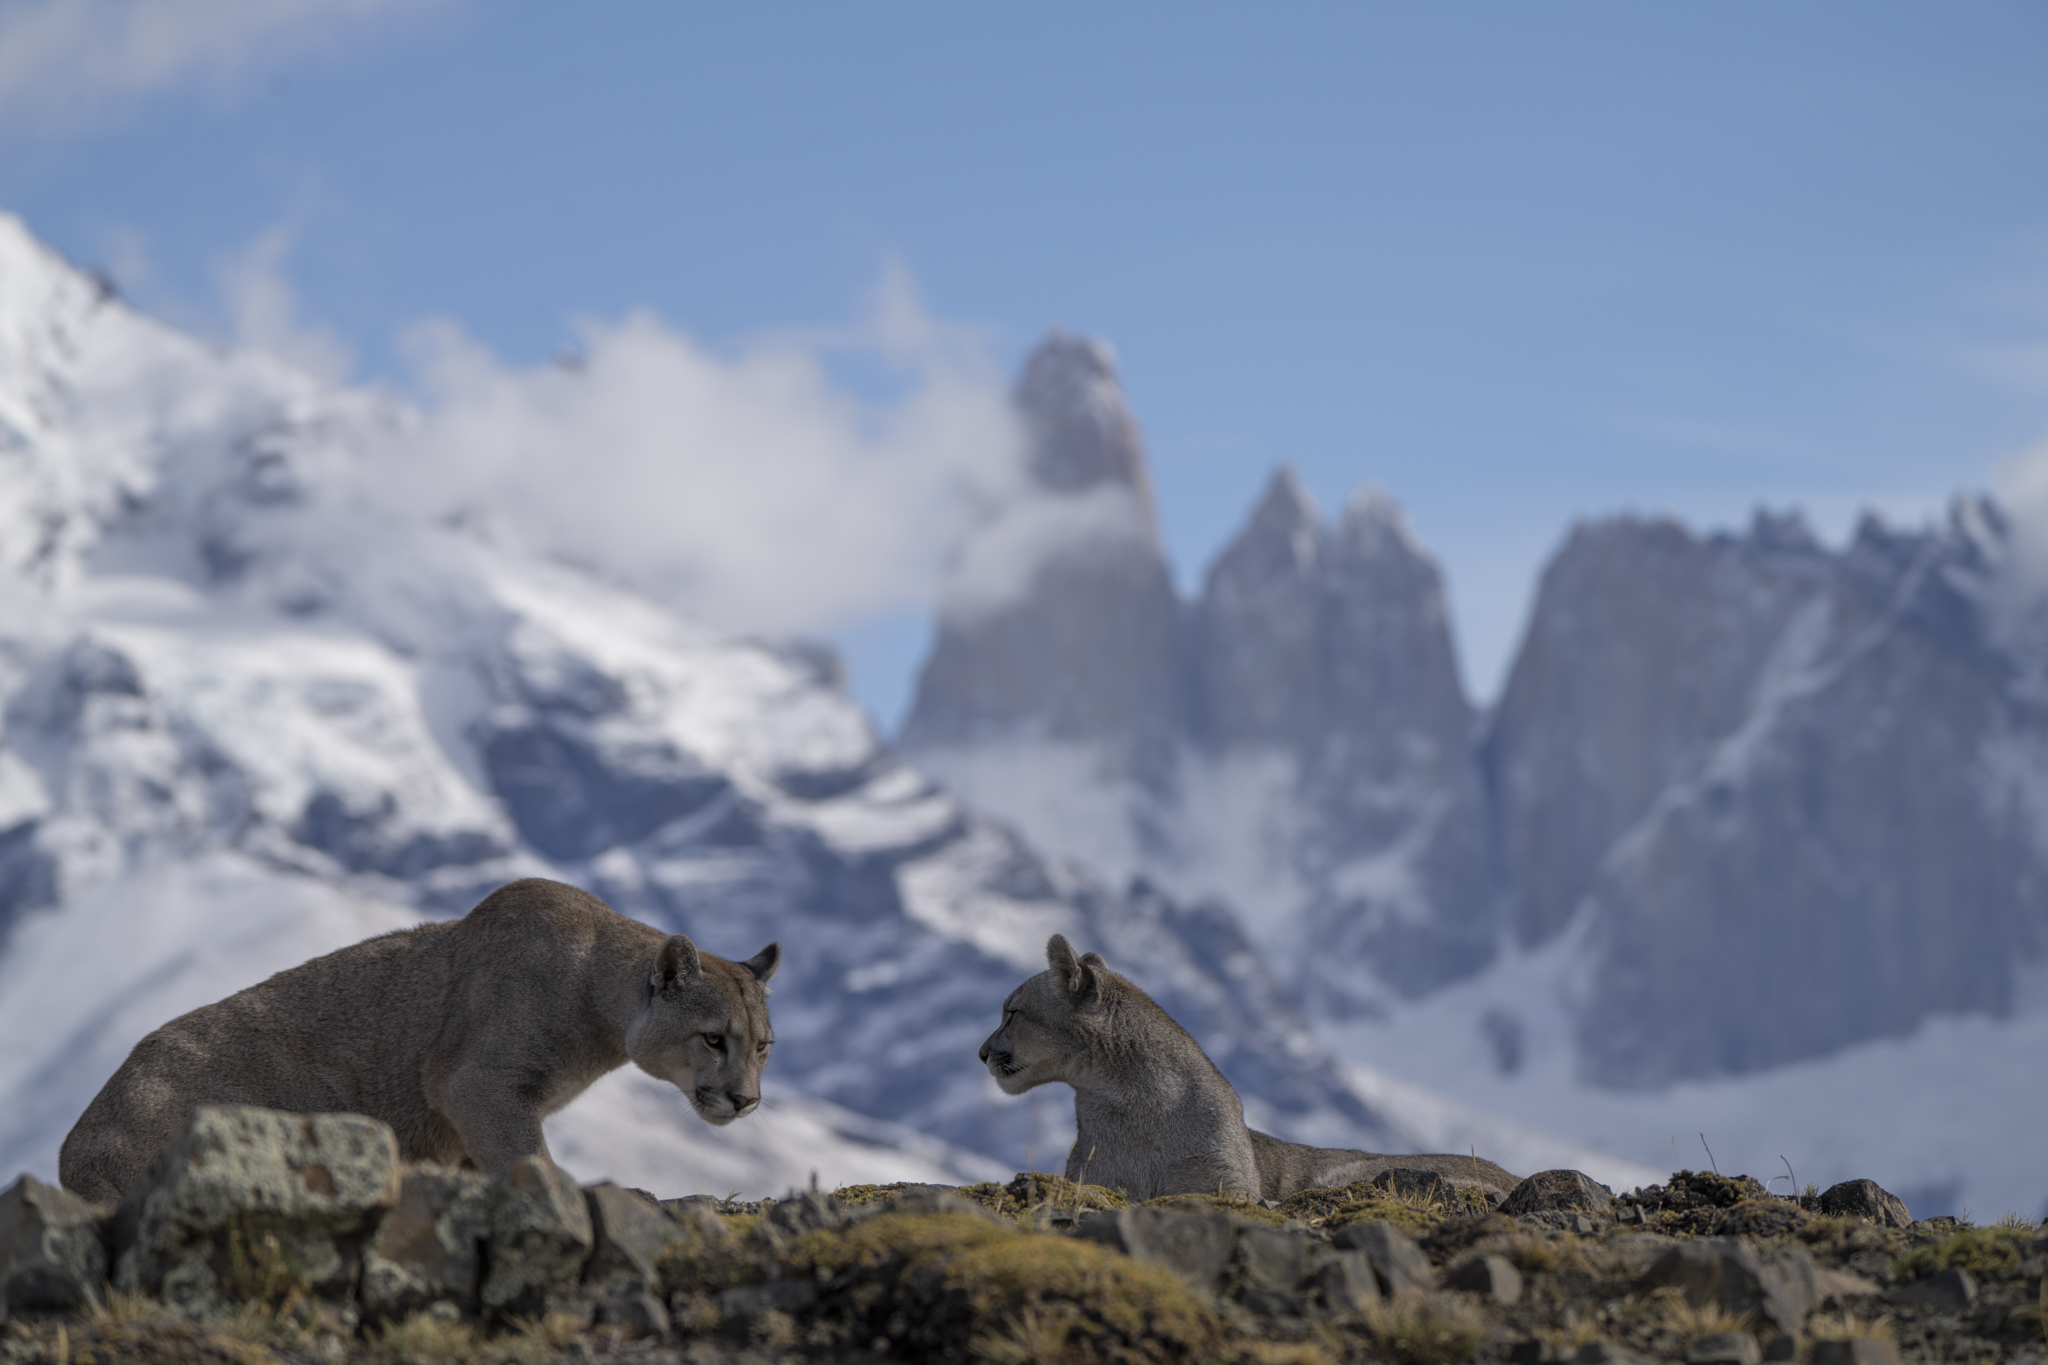 Puma in Focus: A Photographer’s Expedition in the Wilds of Patagonia